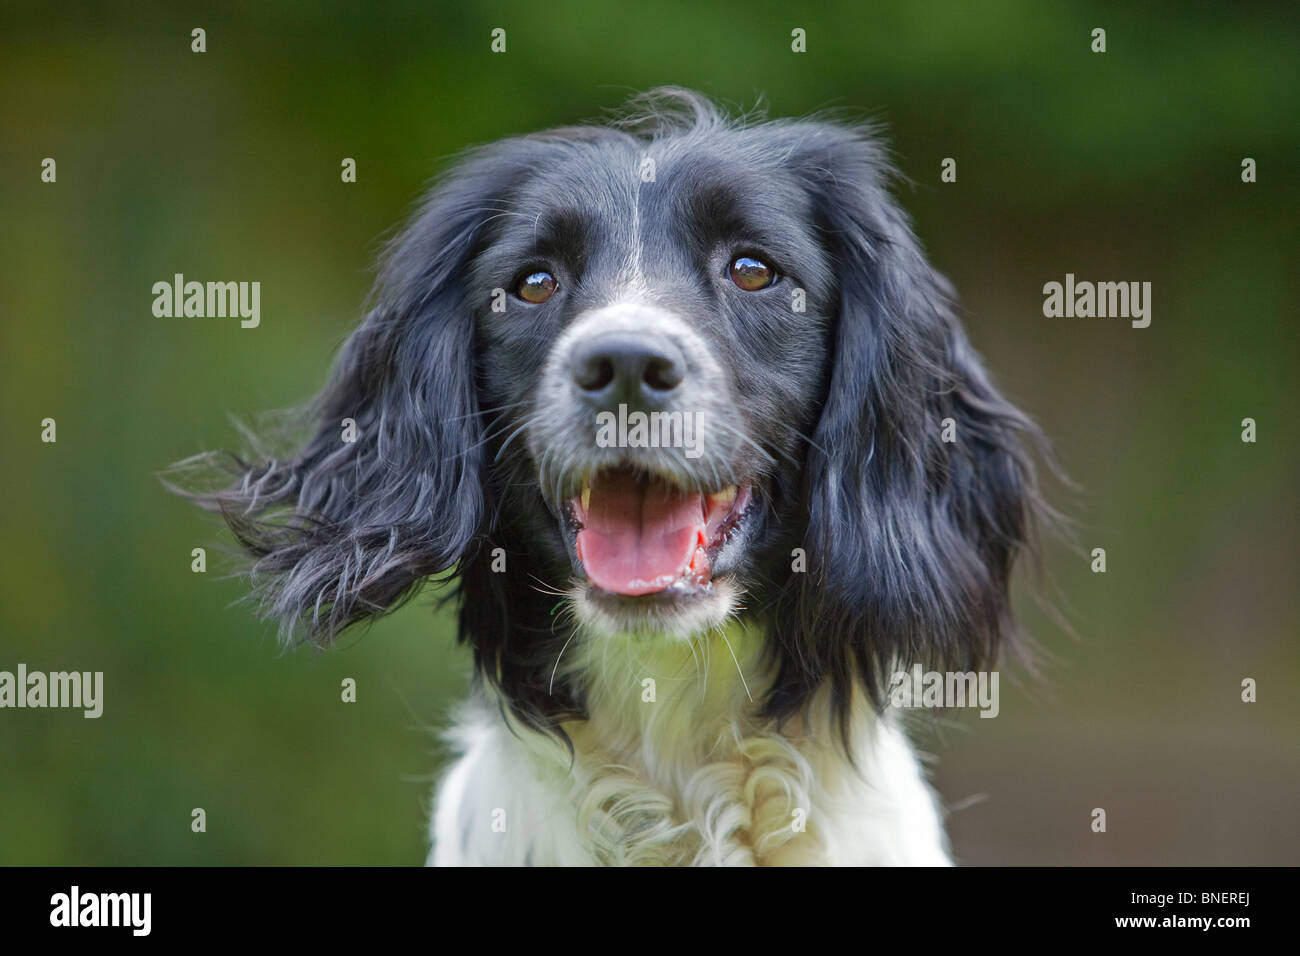 A portrait photograph of a black and white English Springer Spaniel working gun dog outside Stock Photo